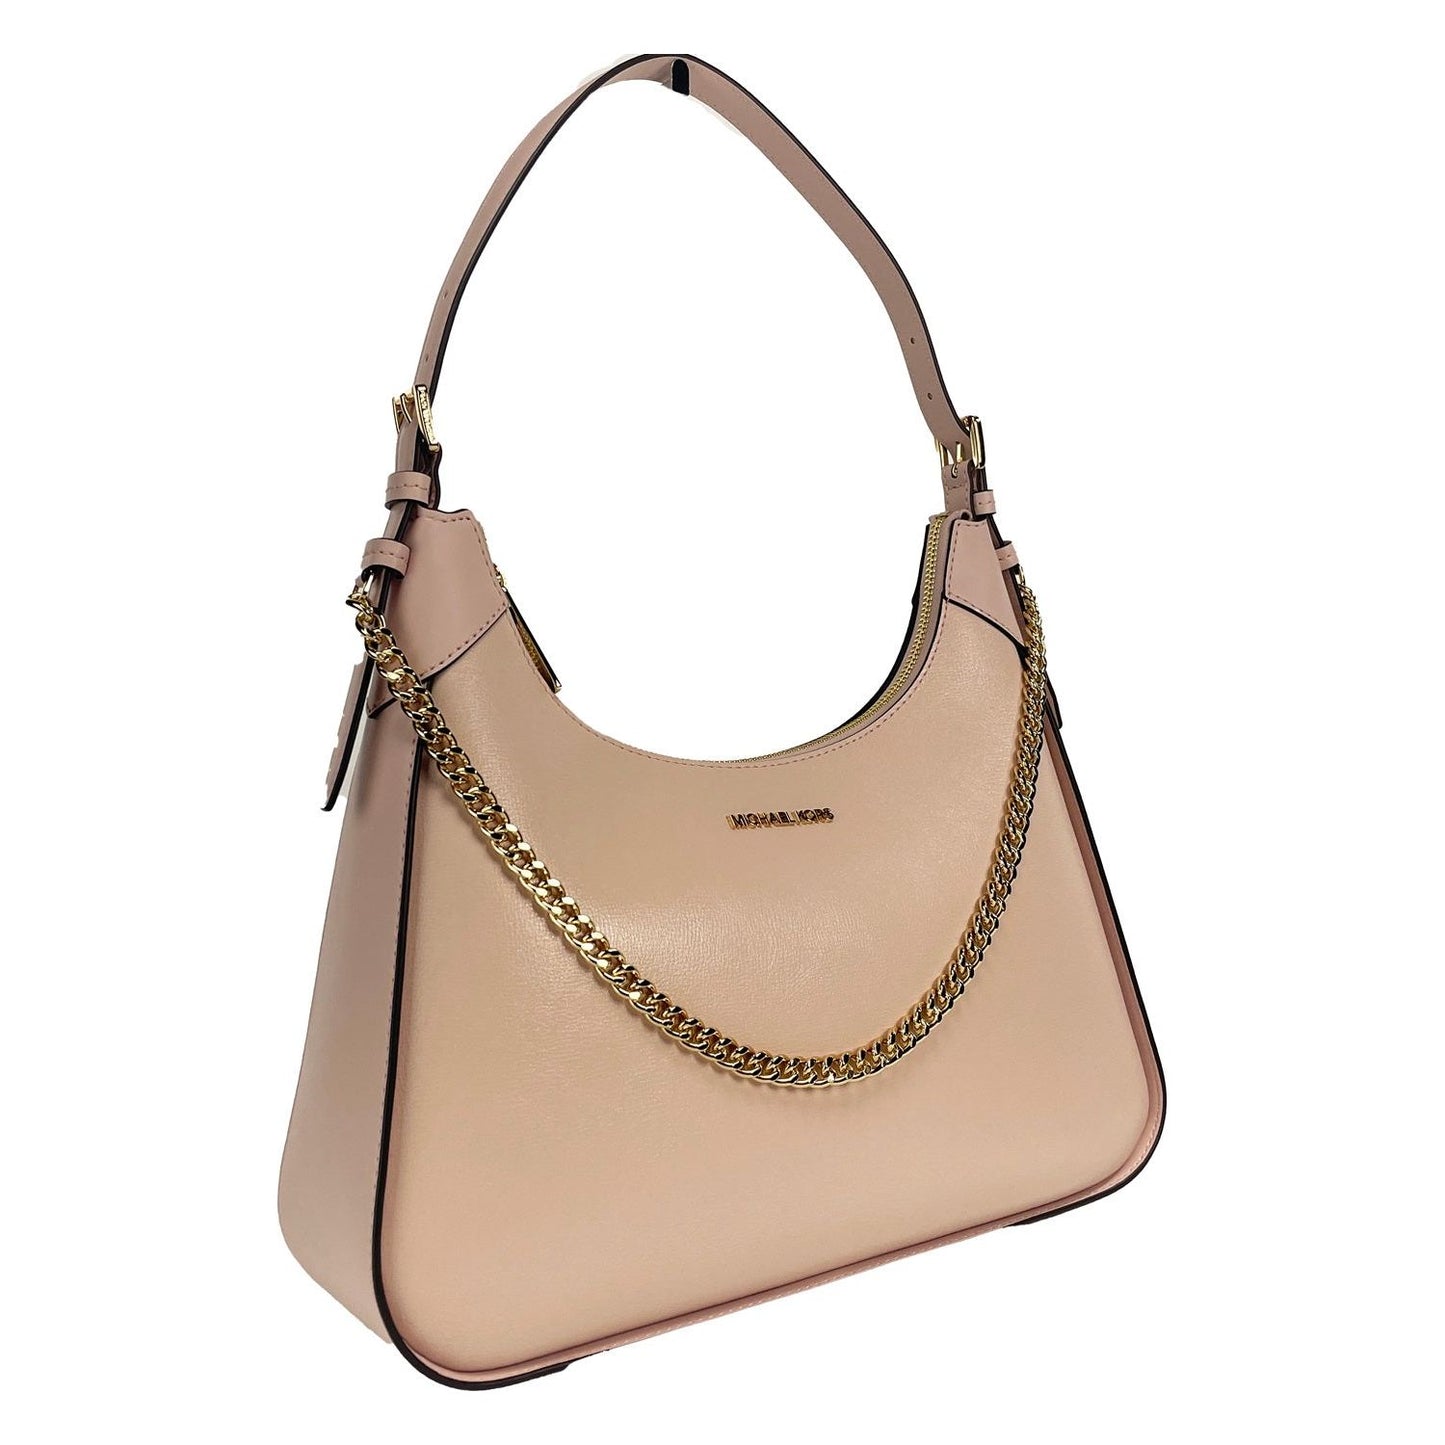 Michael Kors Wilma Large Smooth Leather Chain Shoulder Bag Purse Powder Blush wilma-large-smooth-leather-chain-shoulder-bag-purse-powder-blush